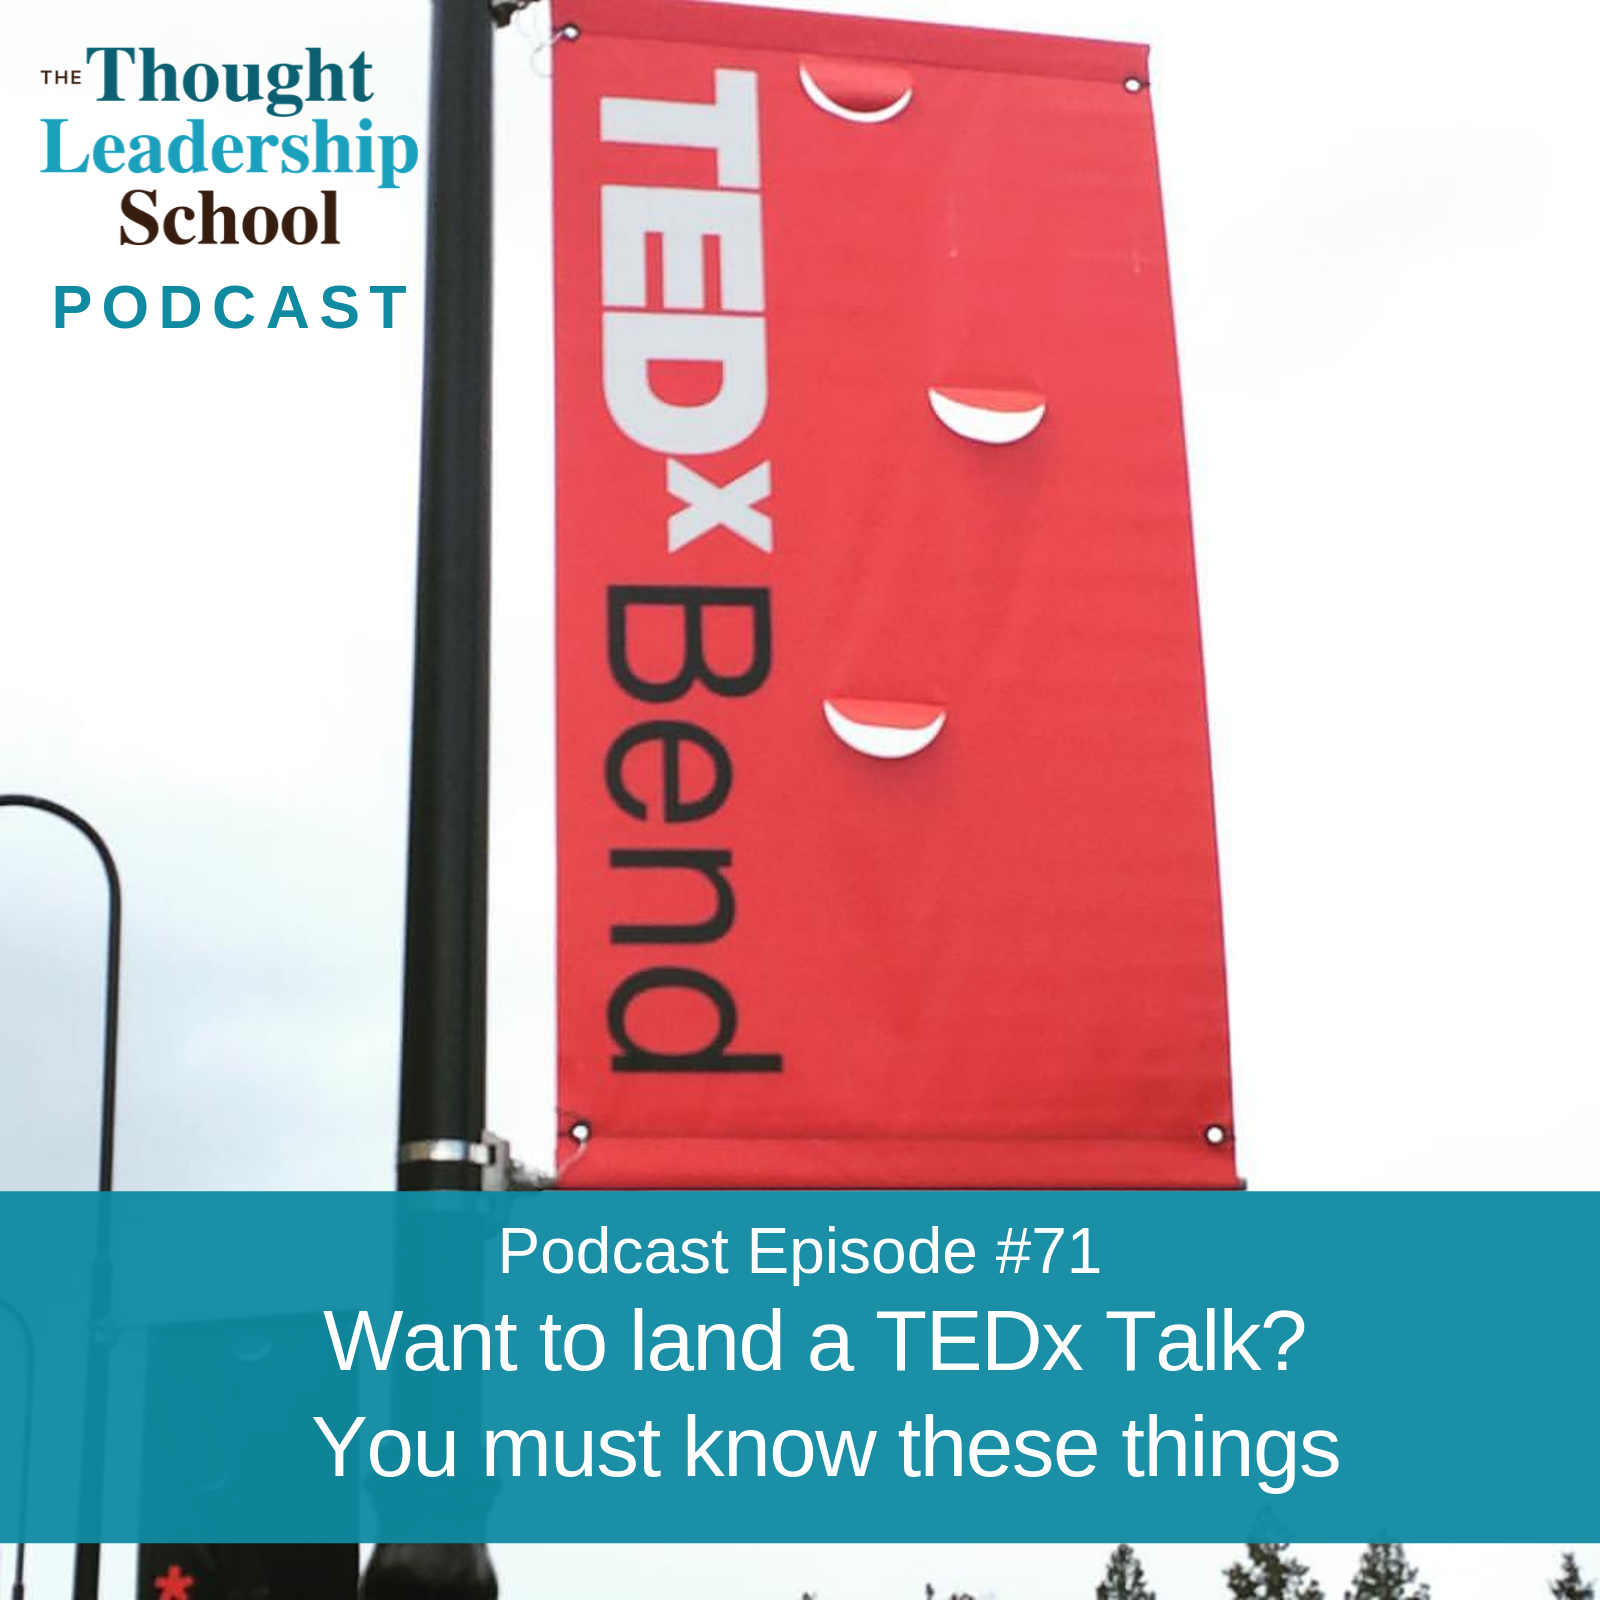 Ep #71: Want to Land a TEDx Talk? Here’s What You Need to Know